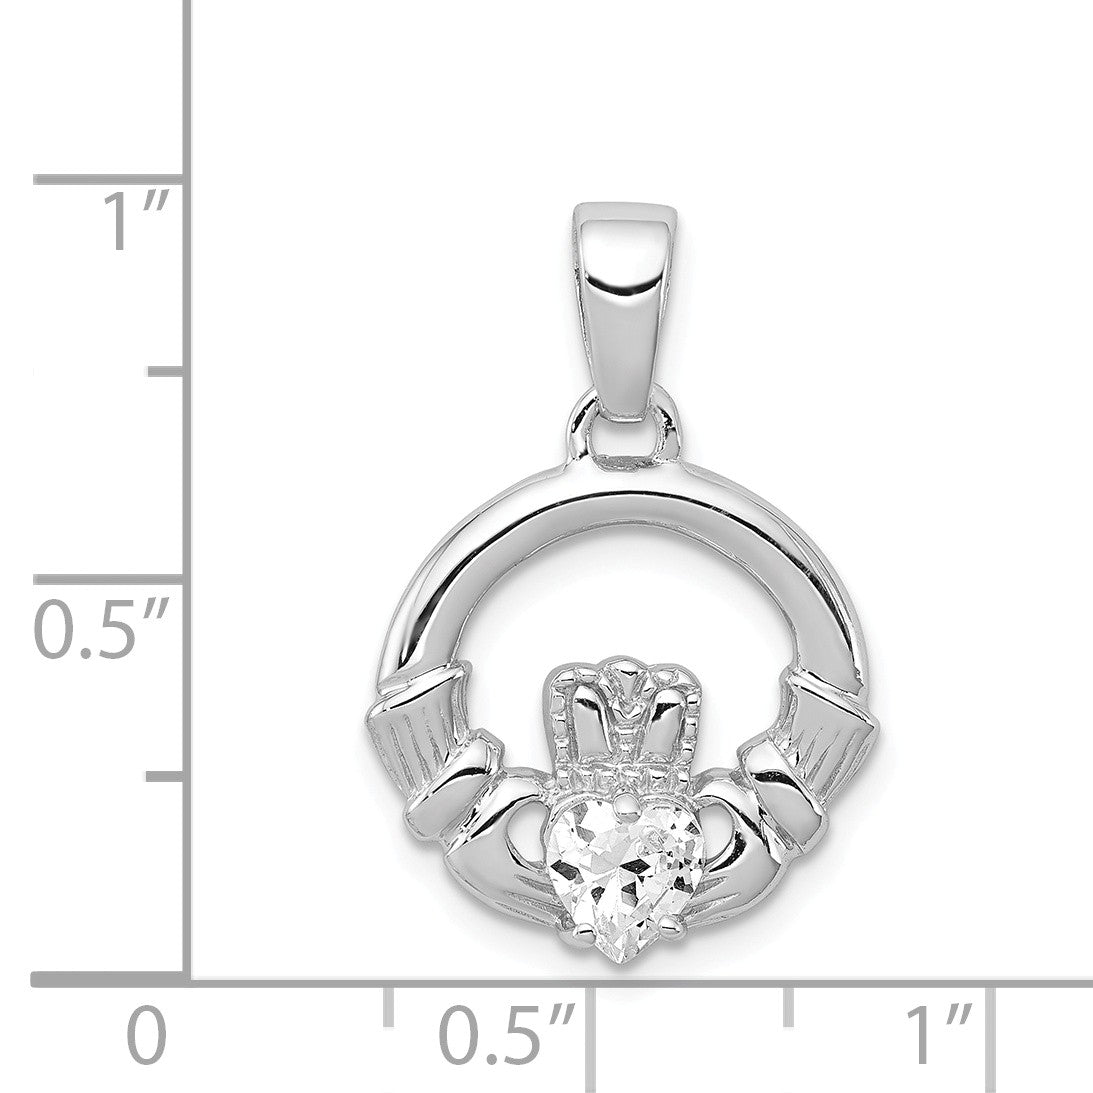 Alternate view of the Sterling Silver and Cubic Zirconia Claddagh Pendant, 15mm by The Black Bow Jewelry Co.